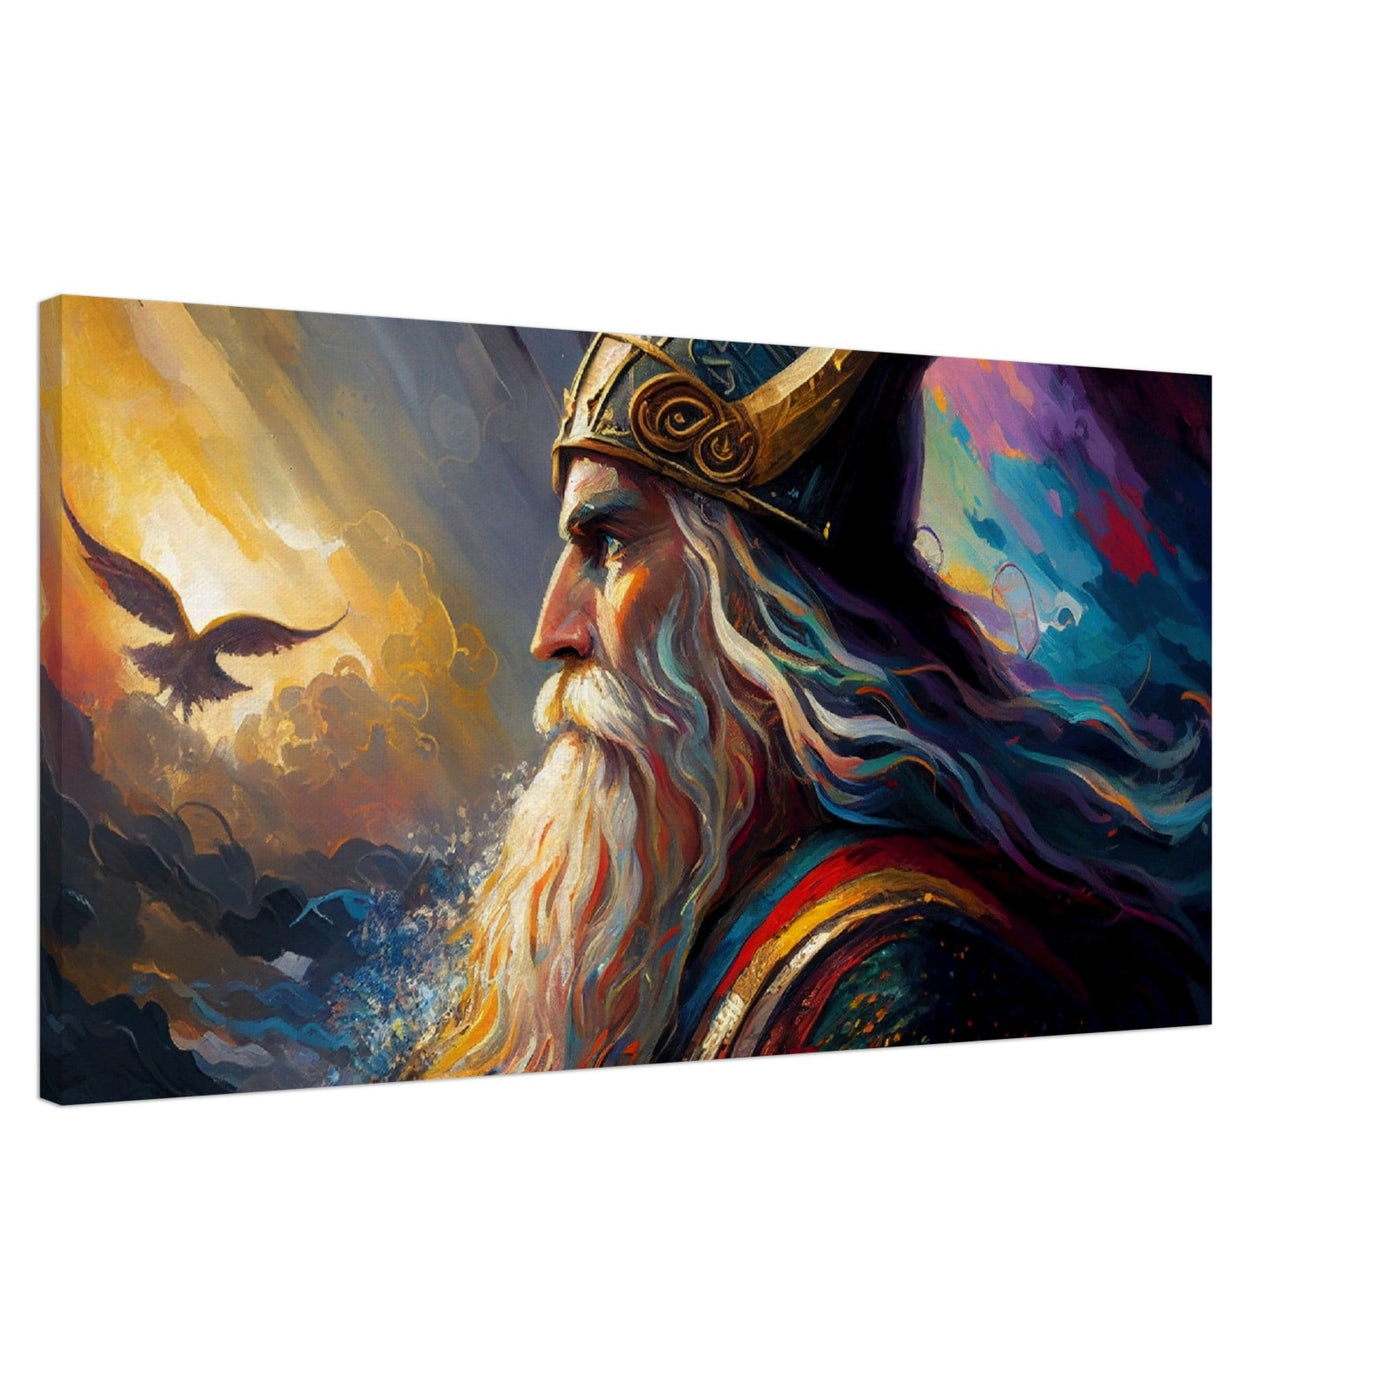 Heimdall: The god of light, guarding the Bifrost Bridge. Printed Oil Painting Canvas